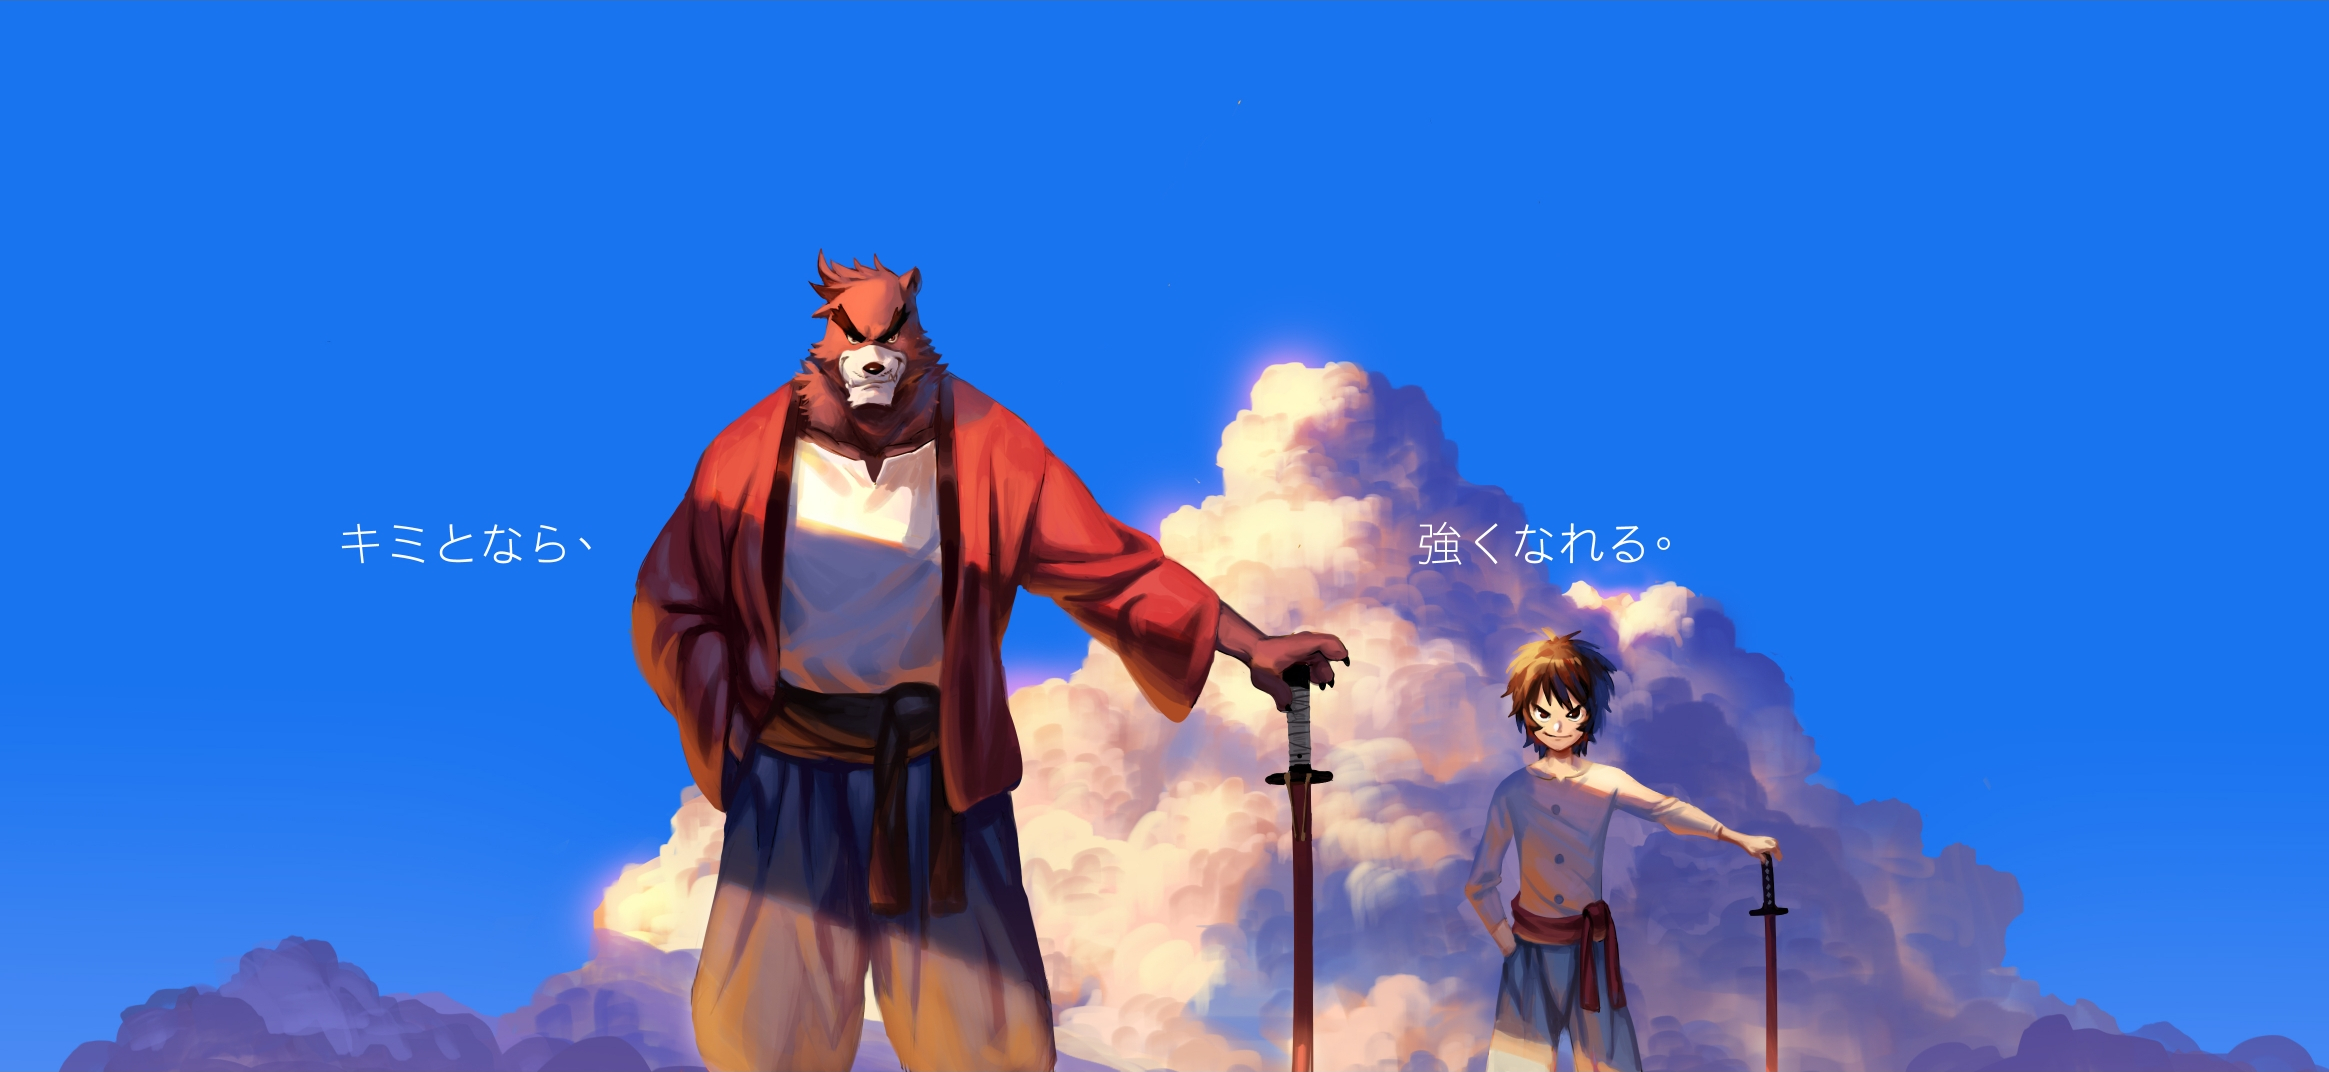 The Boy and the Beast Wallpaper